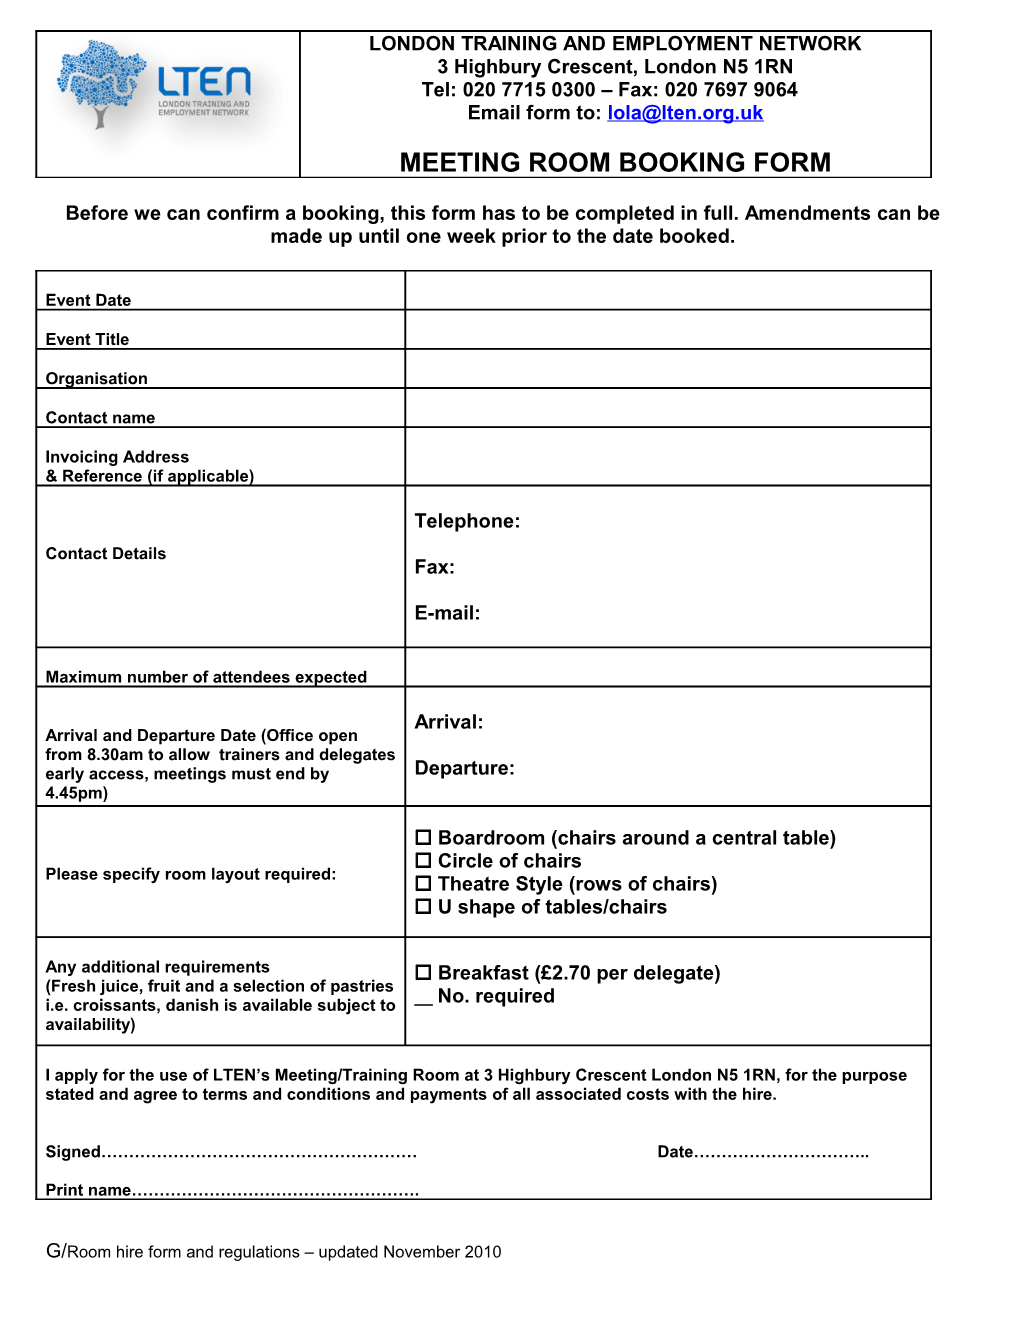 Before We Can Confirm a Booking, This Form Has to Be Completed in Full. Amendments Can